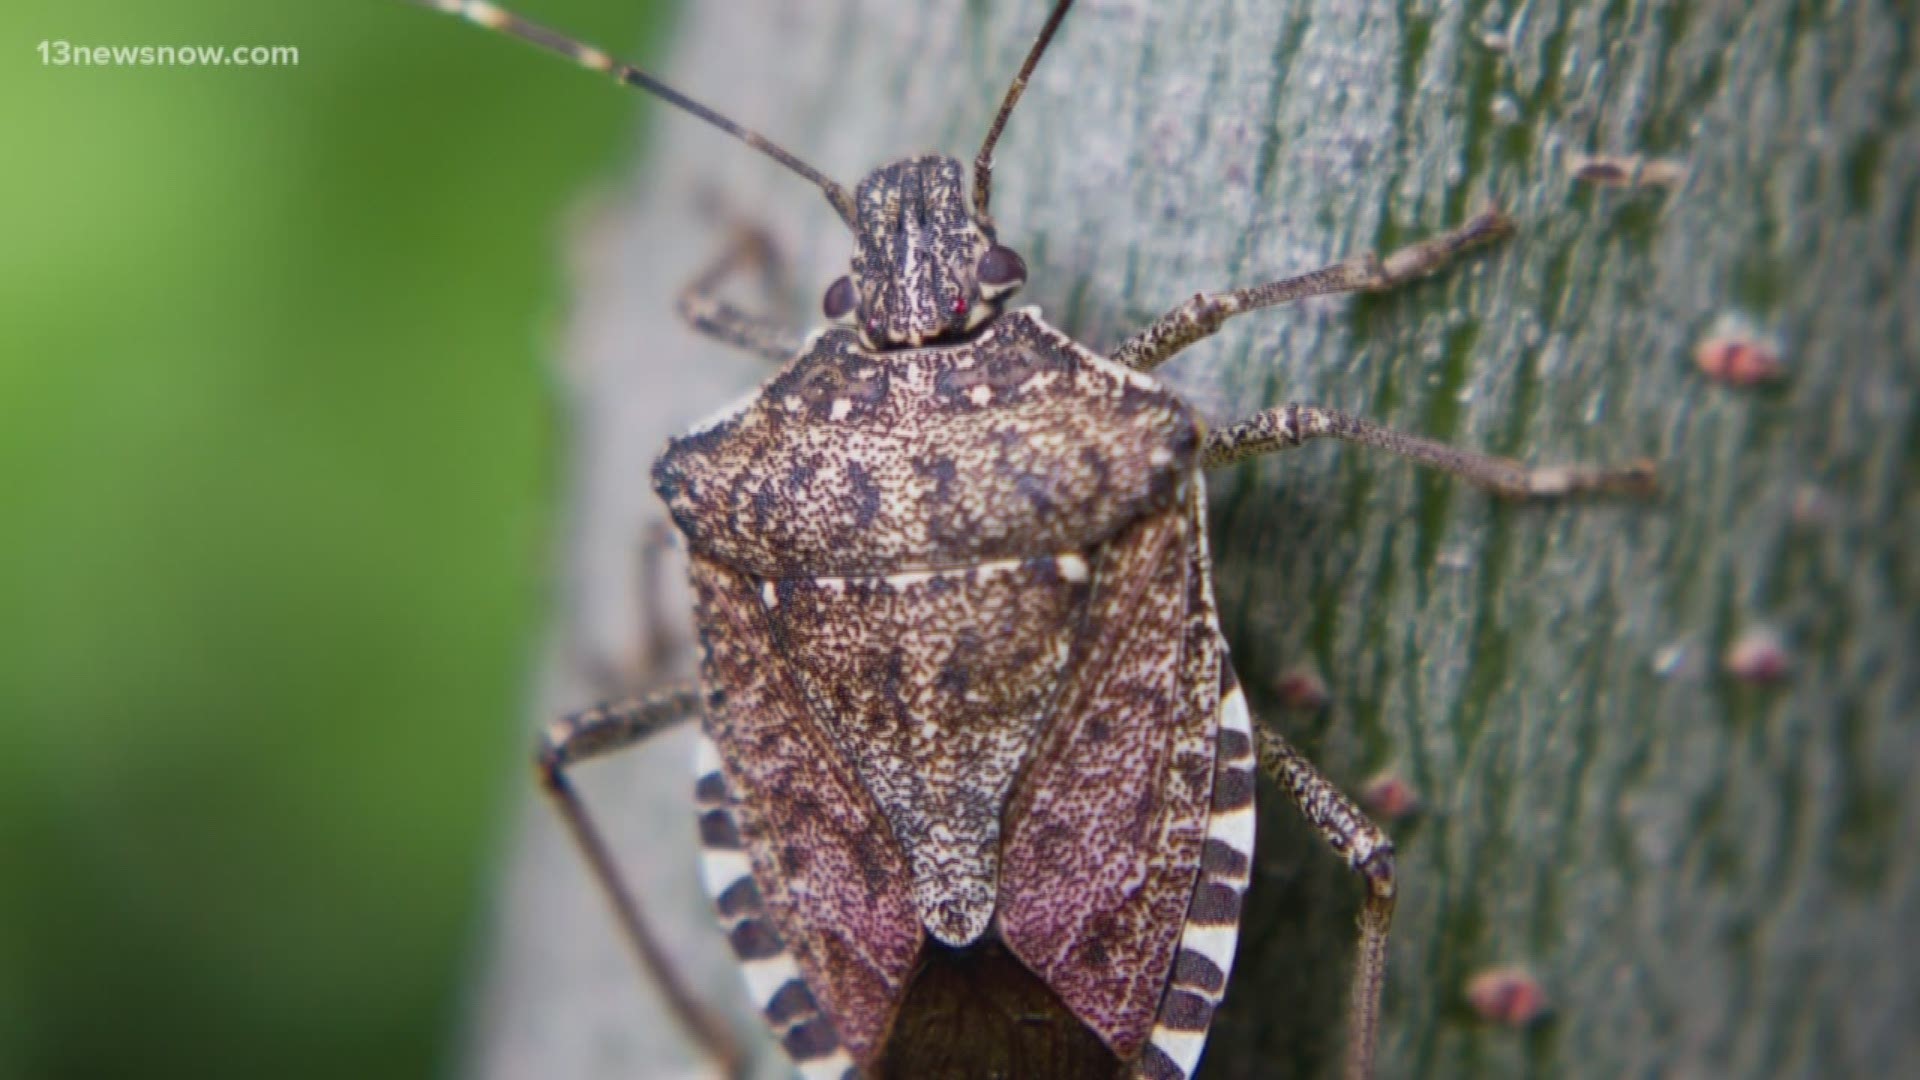 Stink bugs aren't the cutest sight to see, but they leave a foul smell behind if you squish them. The bugs are on the move inside as the temperatures drop.